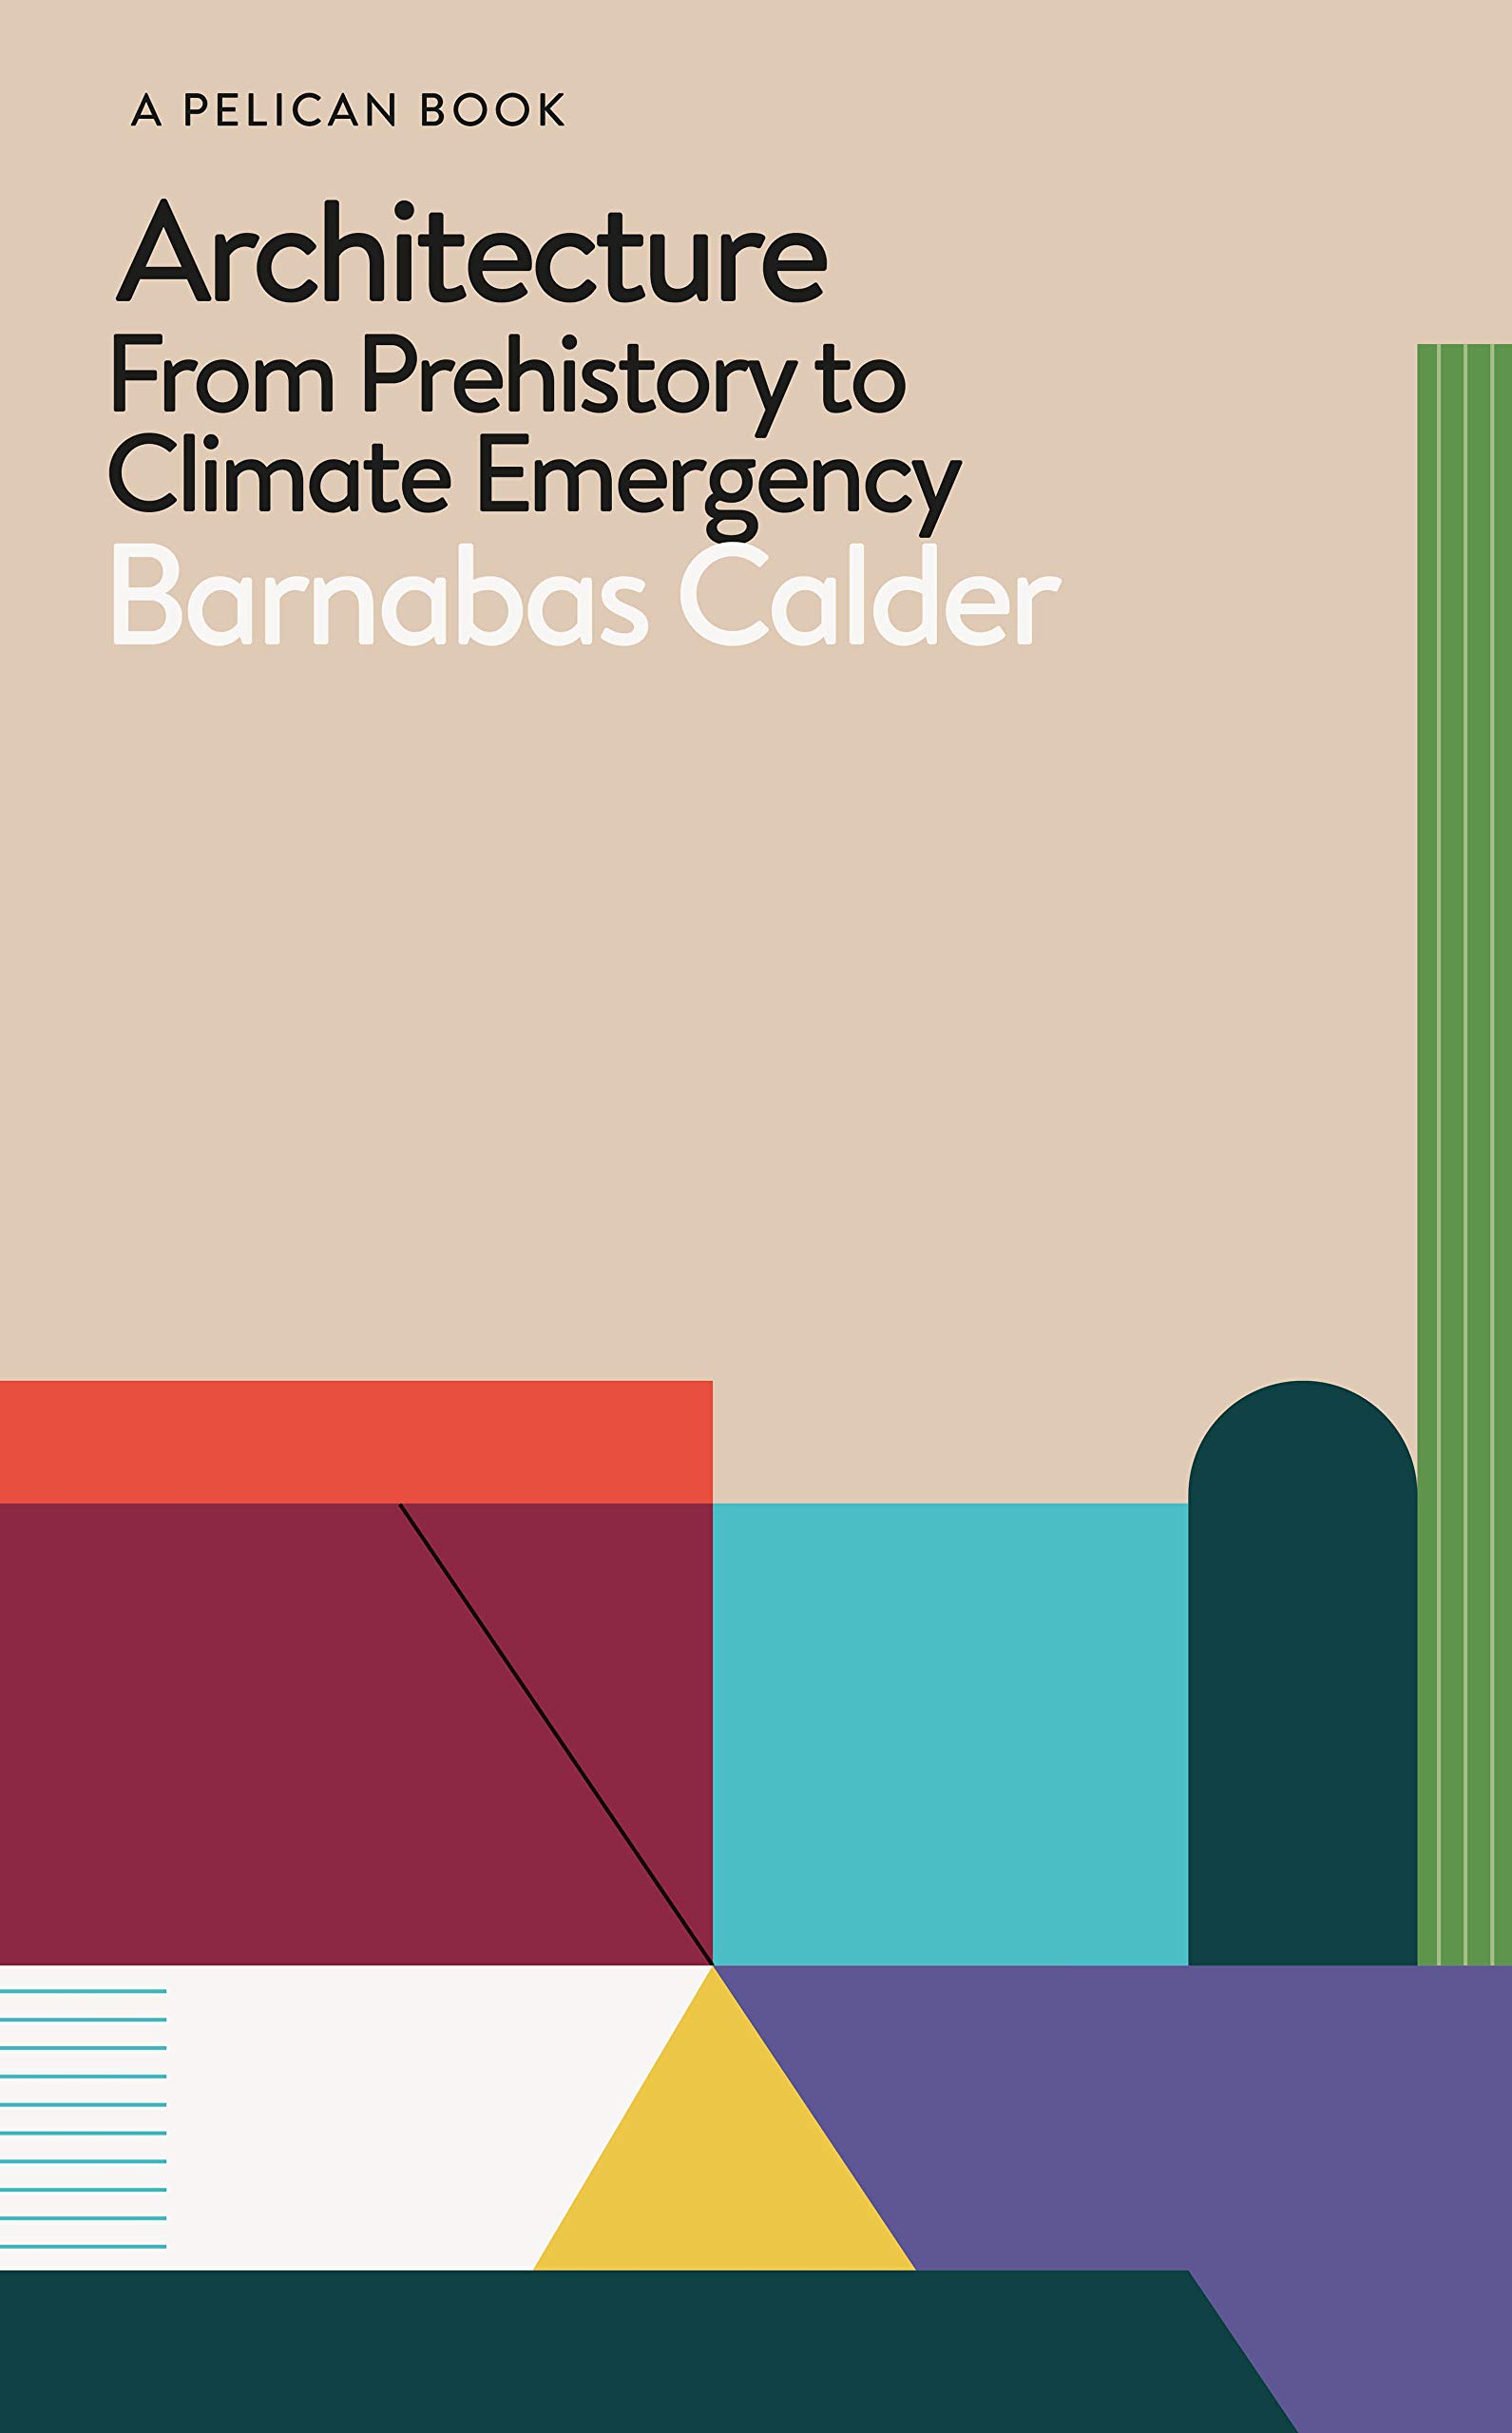 Architecture: From Prehistory to Climate Emergency | Barnabas Calder